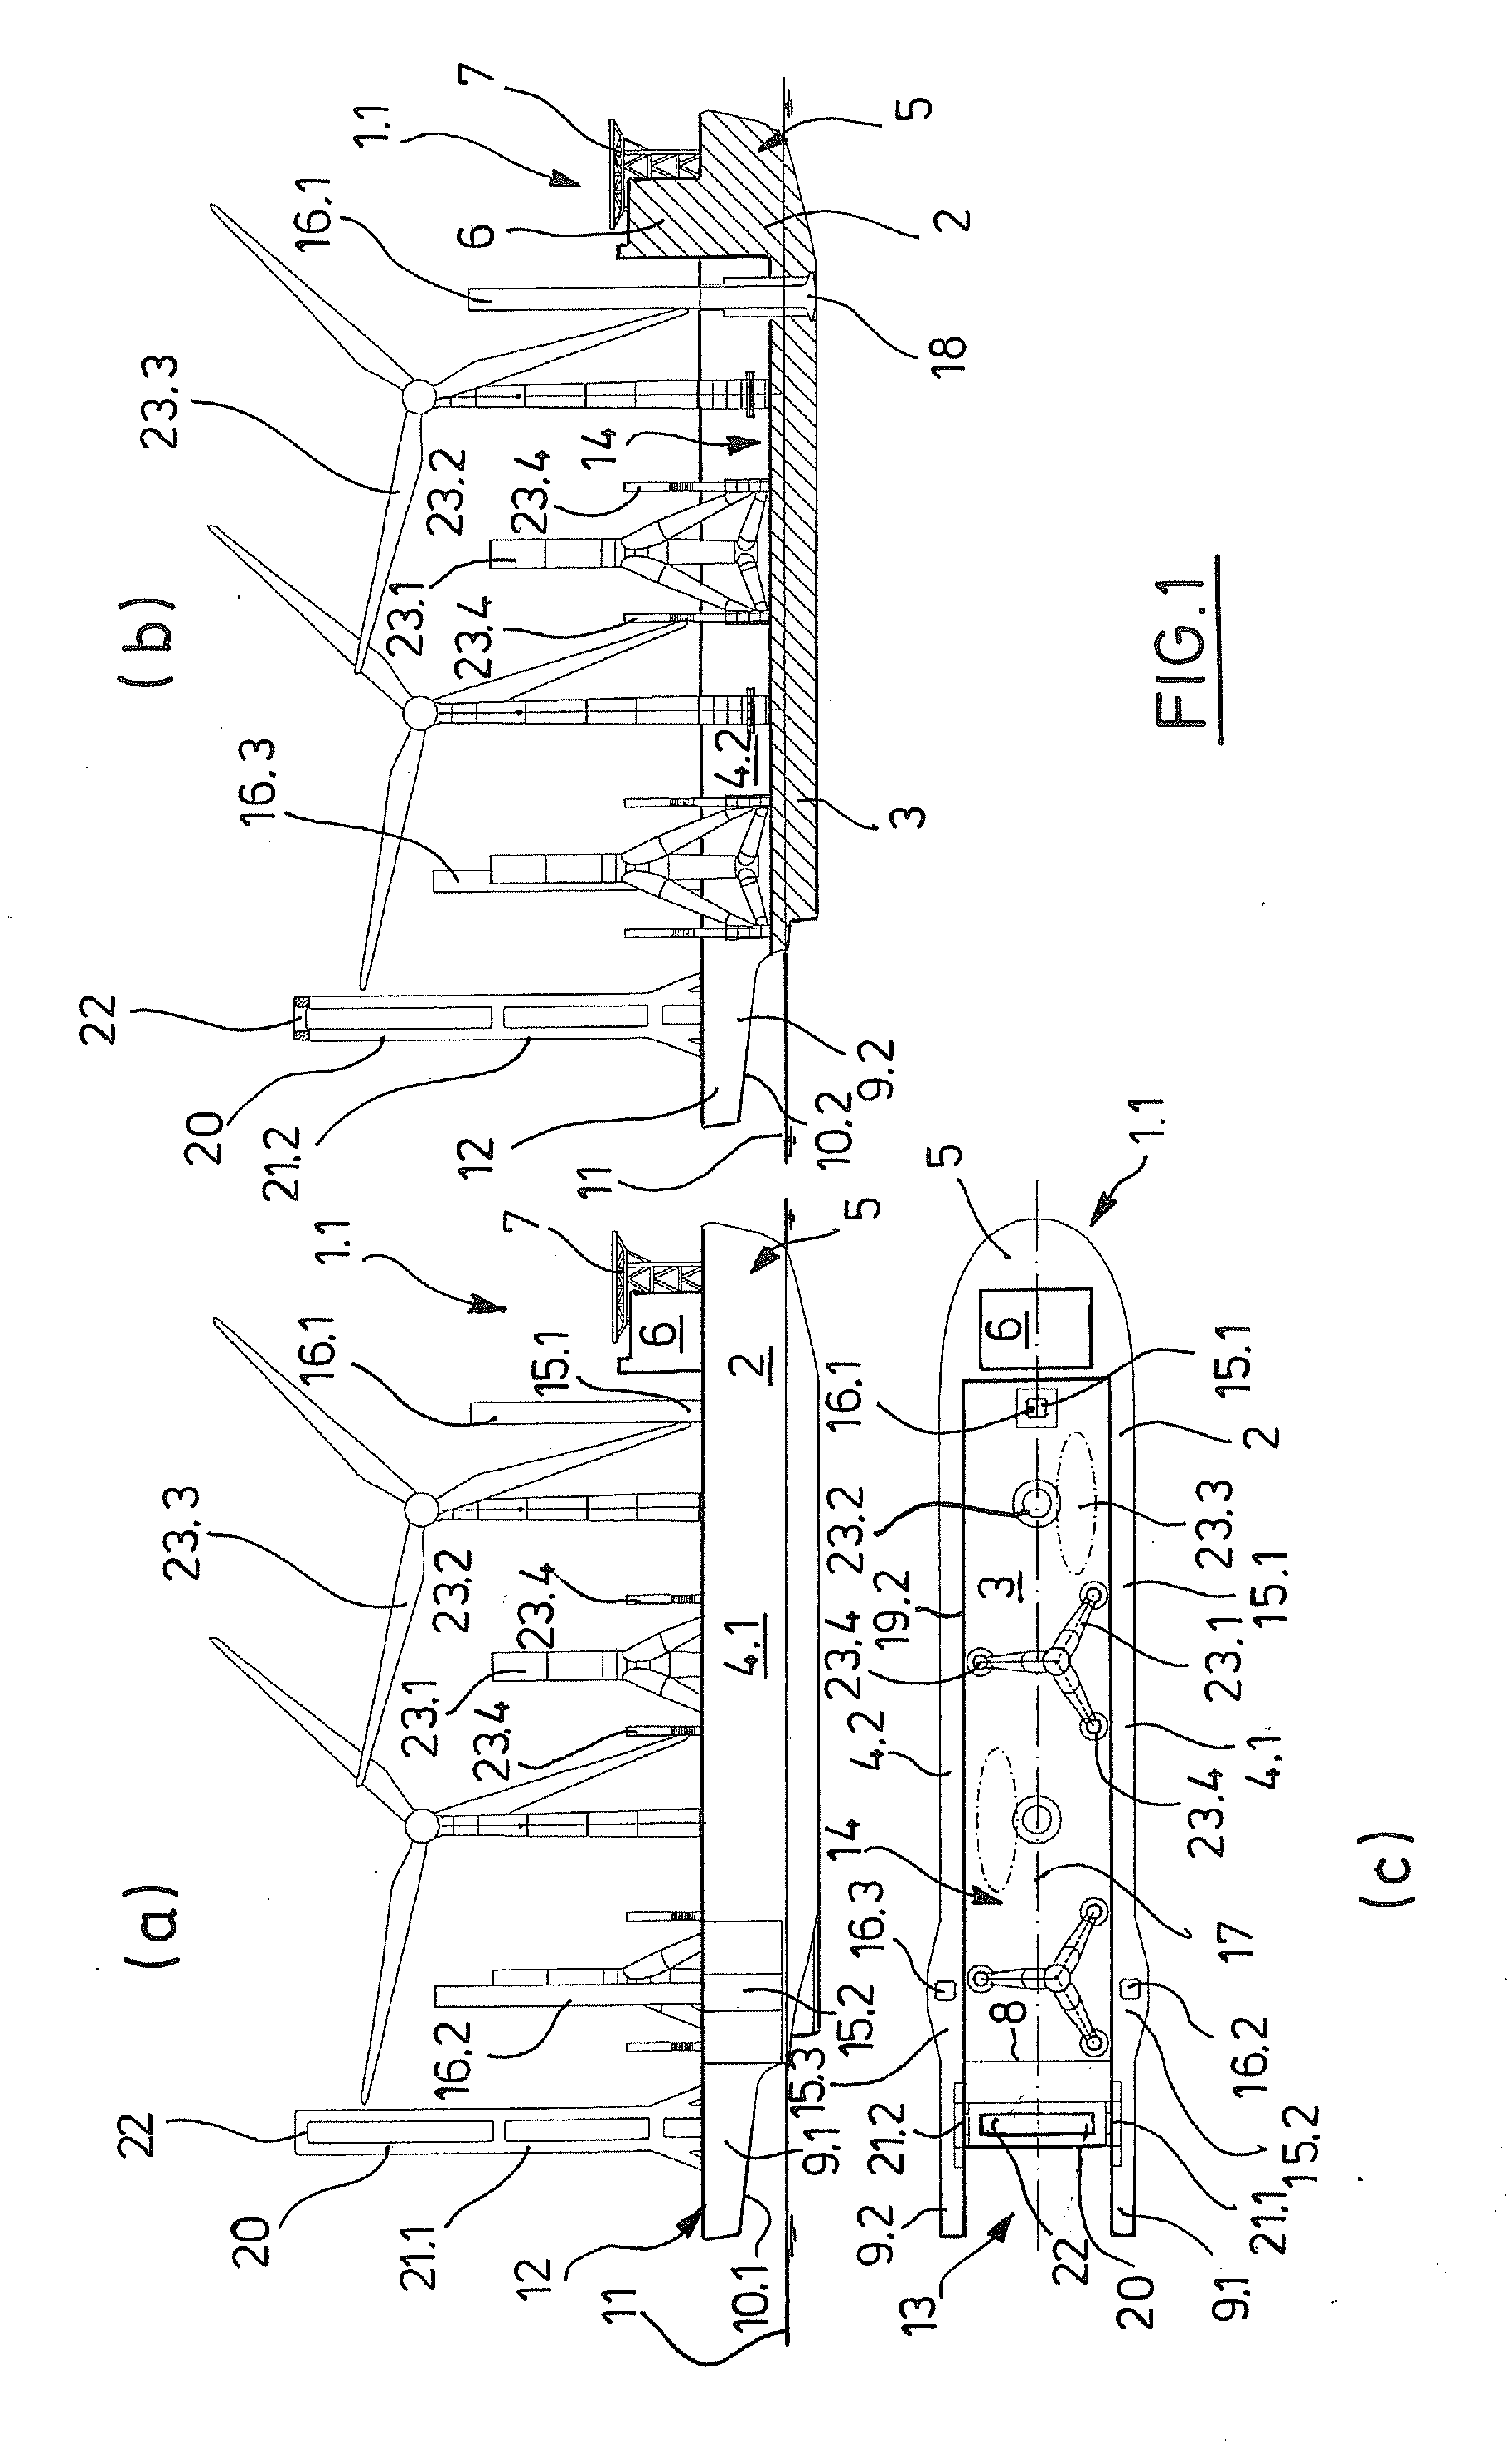 Ship and Method for Conveying and Setting Up Offshore Structures